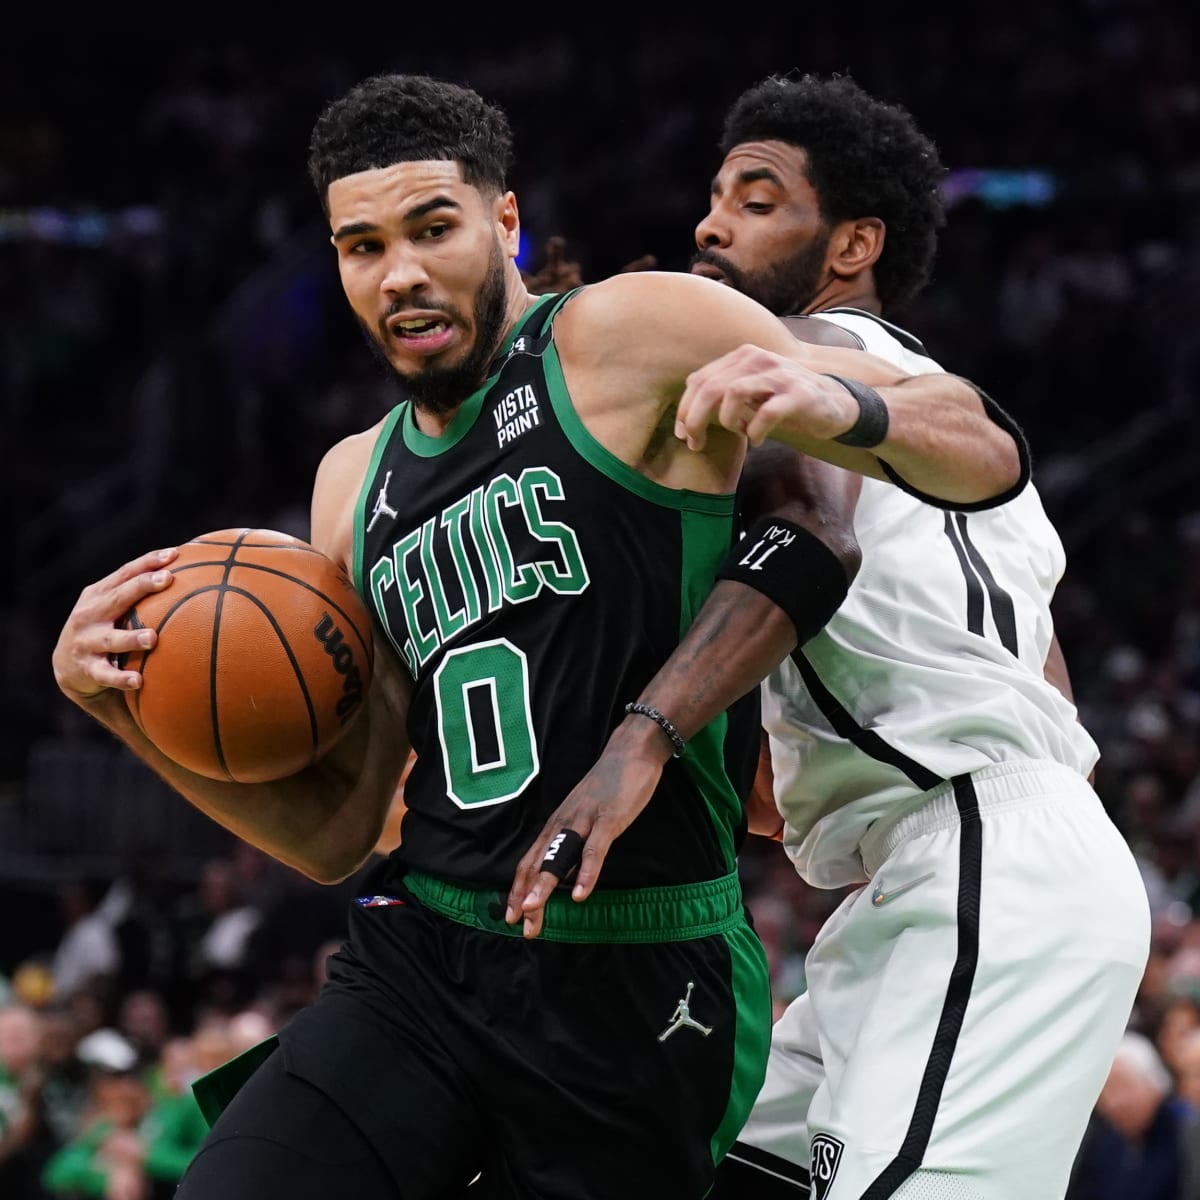 Jaylen Brown stats: Celtic forward leads Boston vs Nets with 27 points